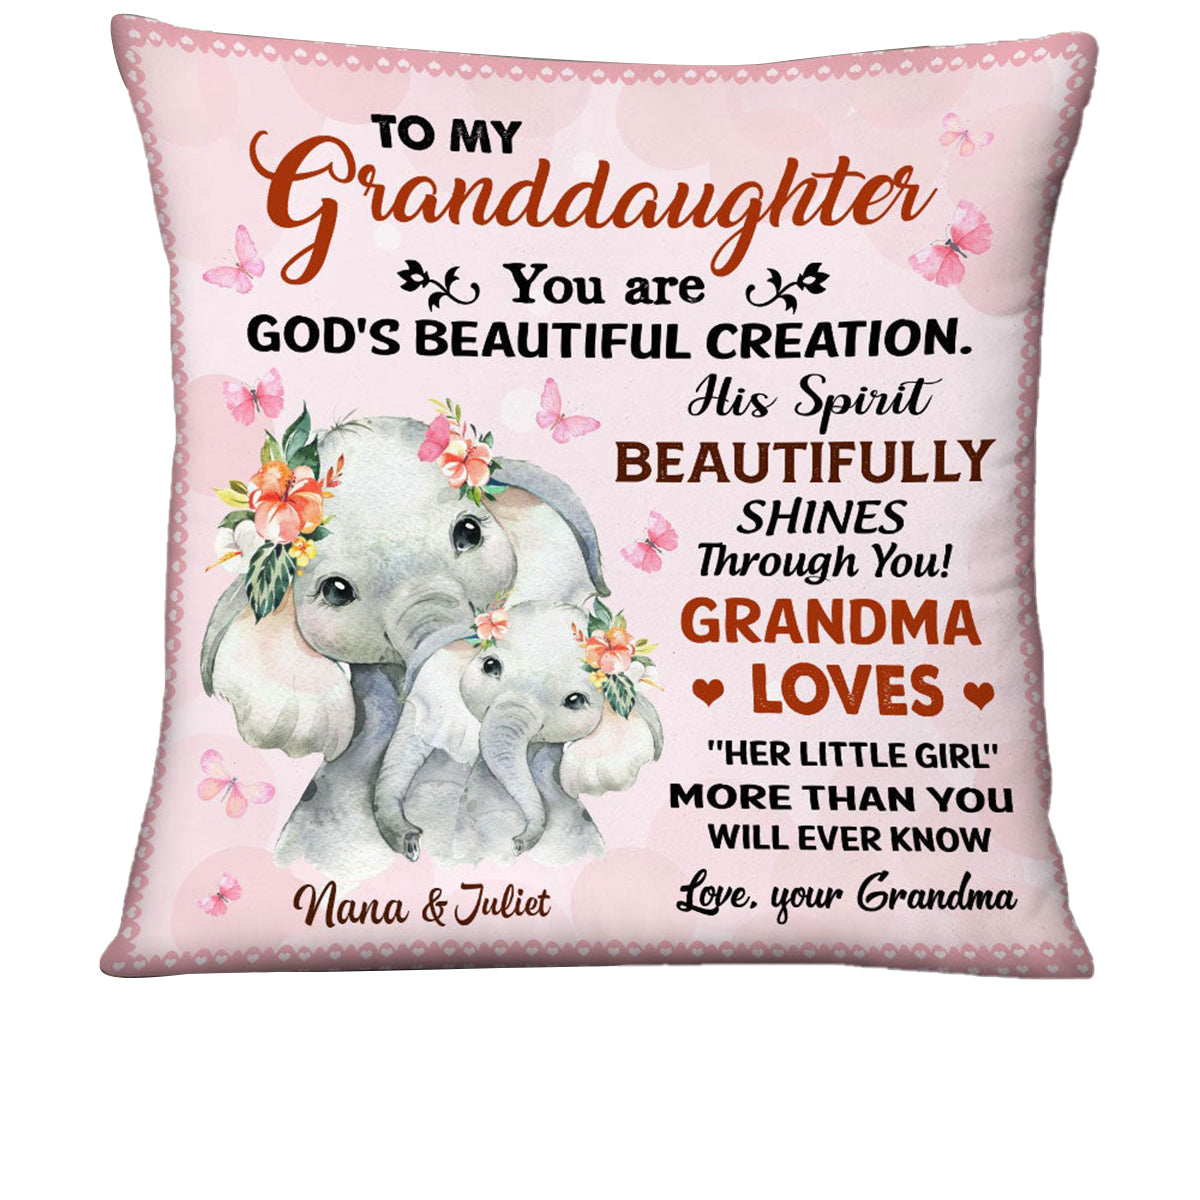 To My Daughter Granddaughter, Grandma Mom Loves ''Her Little Girl'' More Than You Will Ever Know Personalized Elephant Pillow